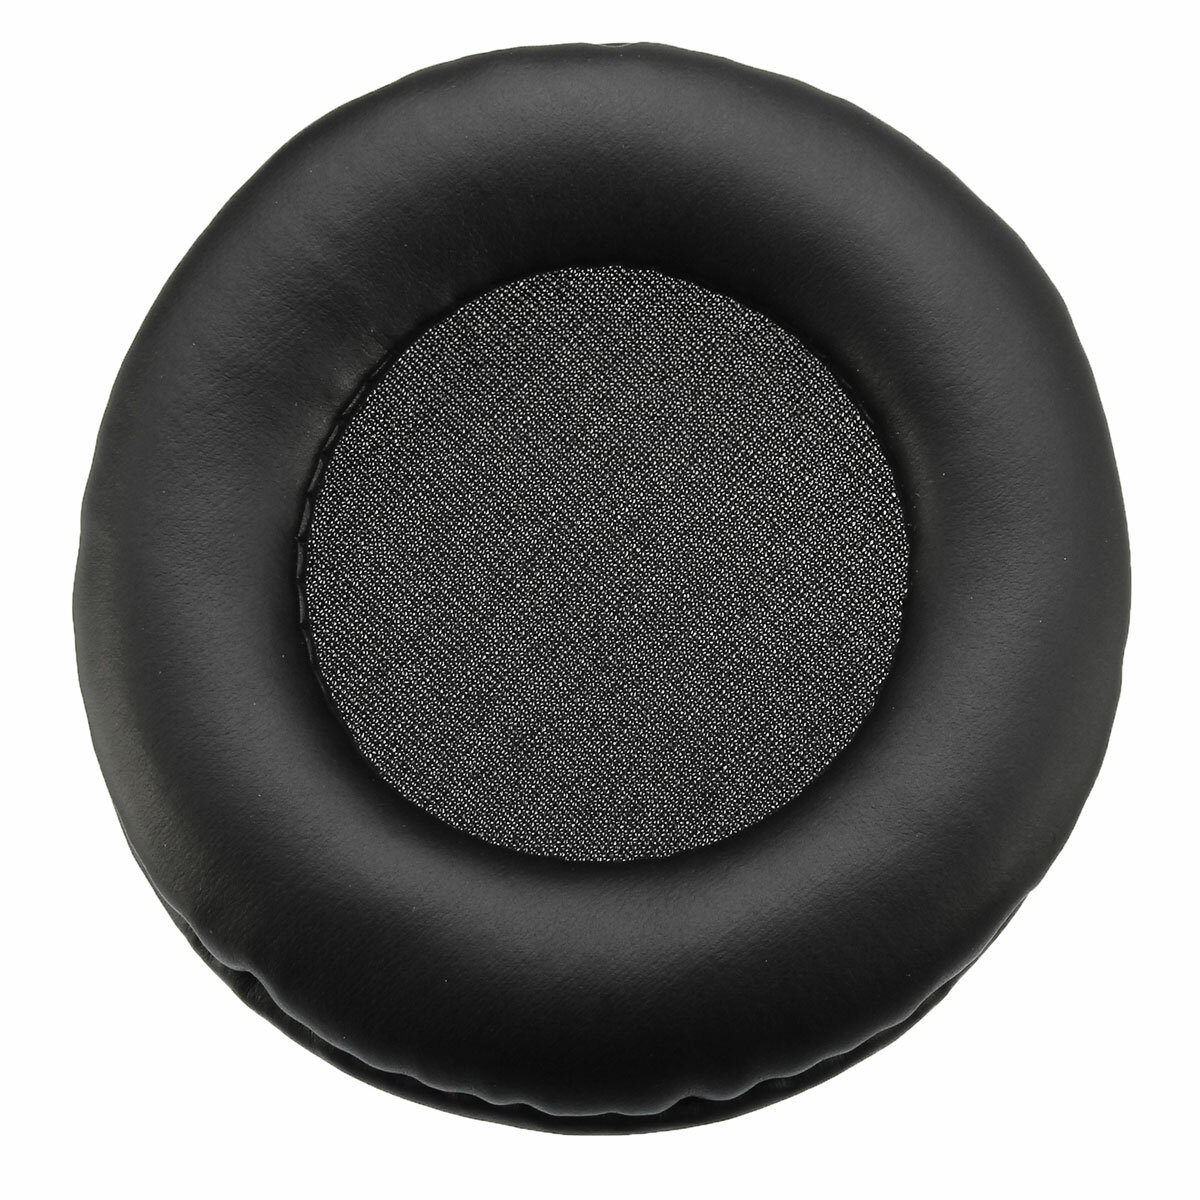 Bakeey 1PC Ear Pads Headphone Earpads PU Leather Sponge Foam Replacement Headset Ear Pad Compatible with Bluedio R+ R-Plus COD